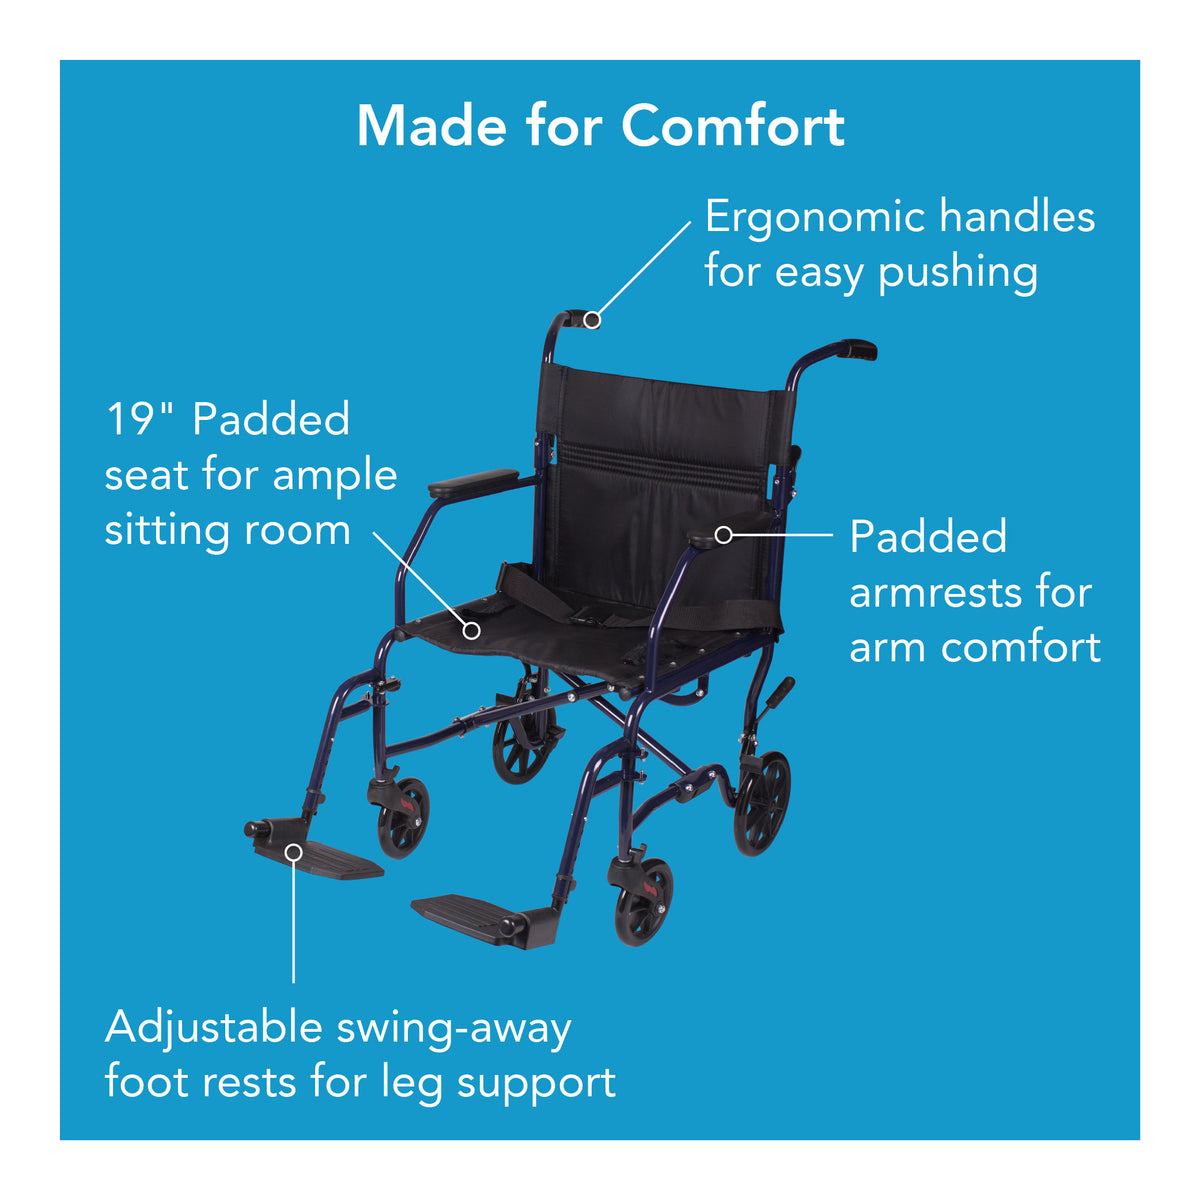 A blue transport chair over a blue background with text explaining its features for comfort